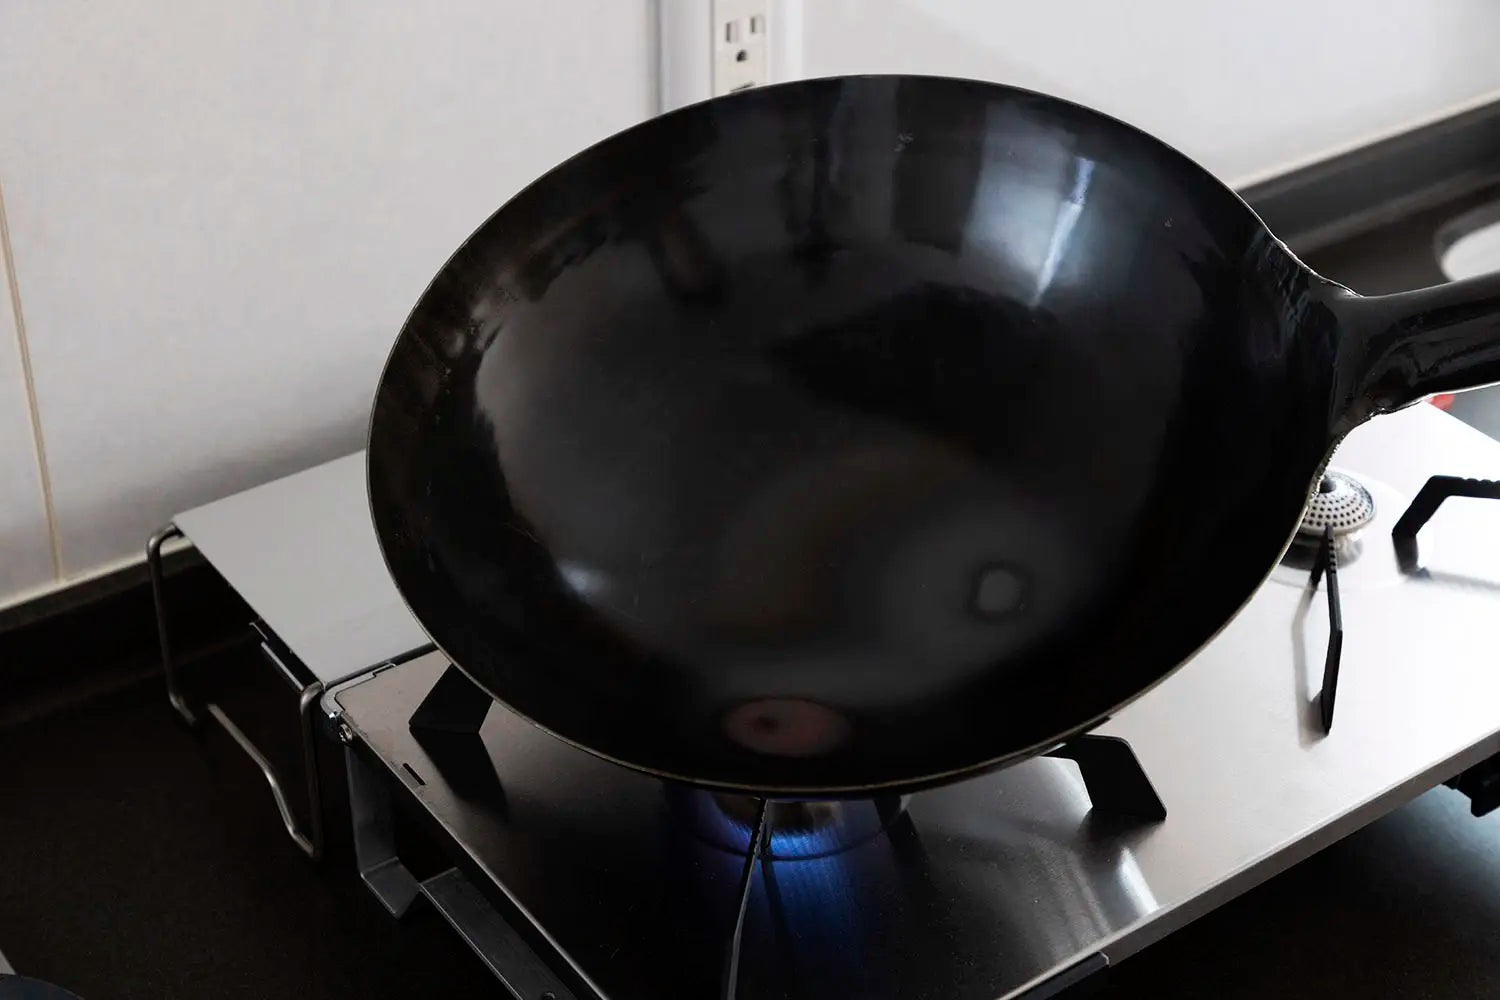 Burning off the anti-rust coating on a new wok